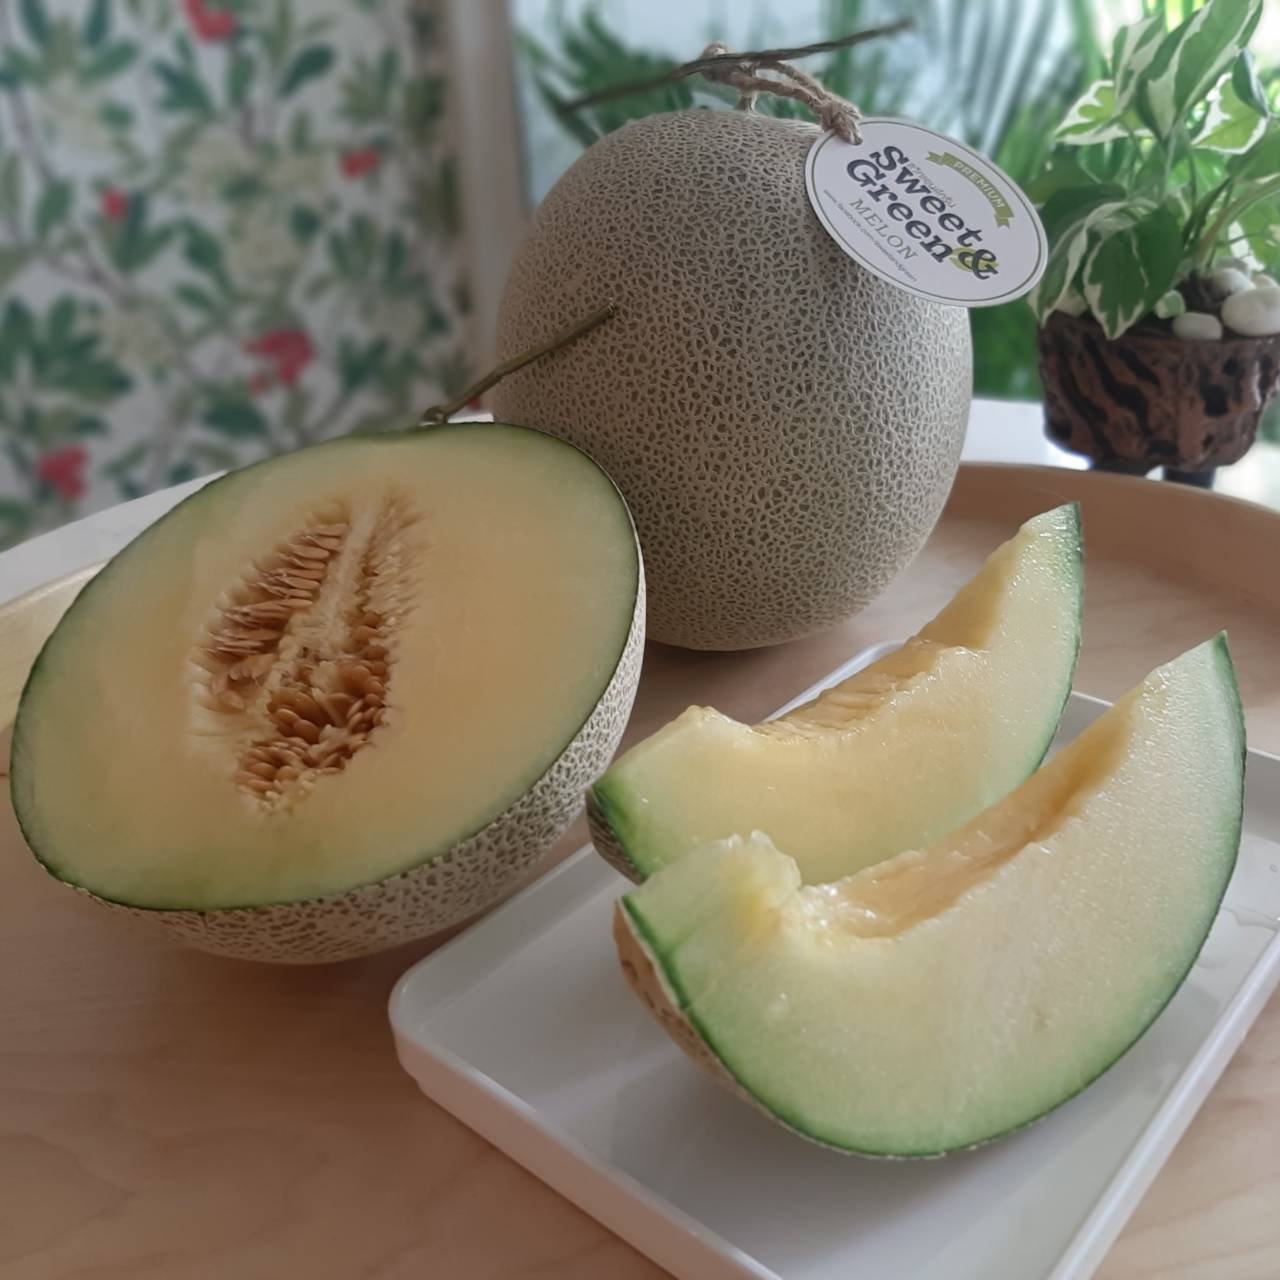 How to pick Melon